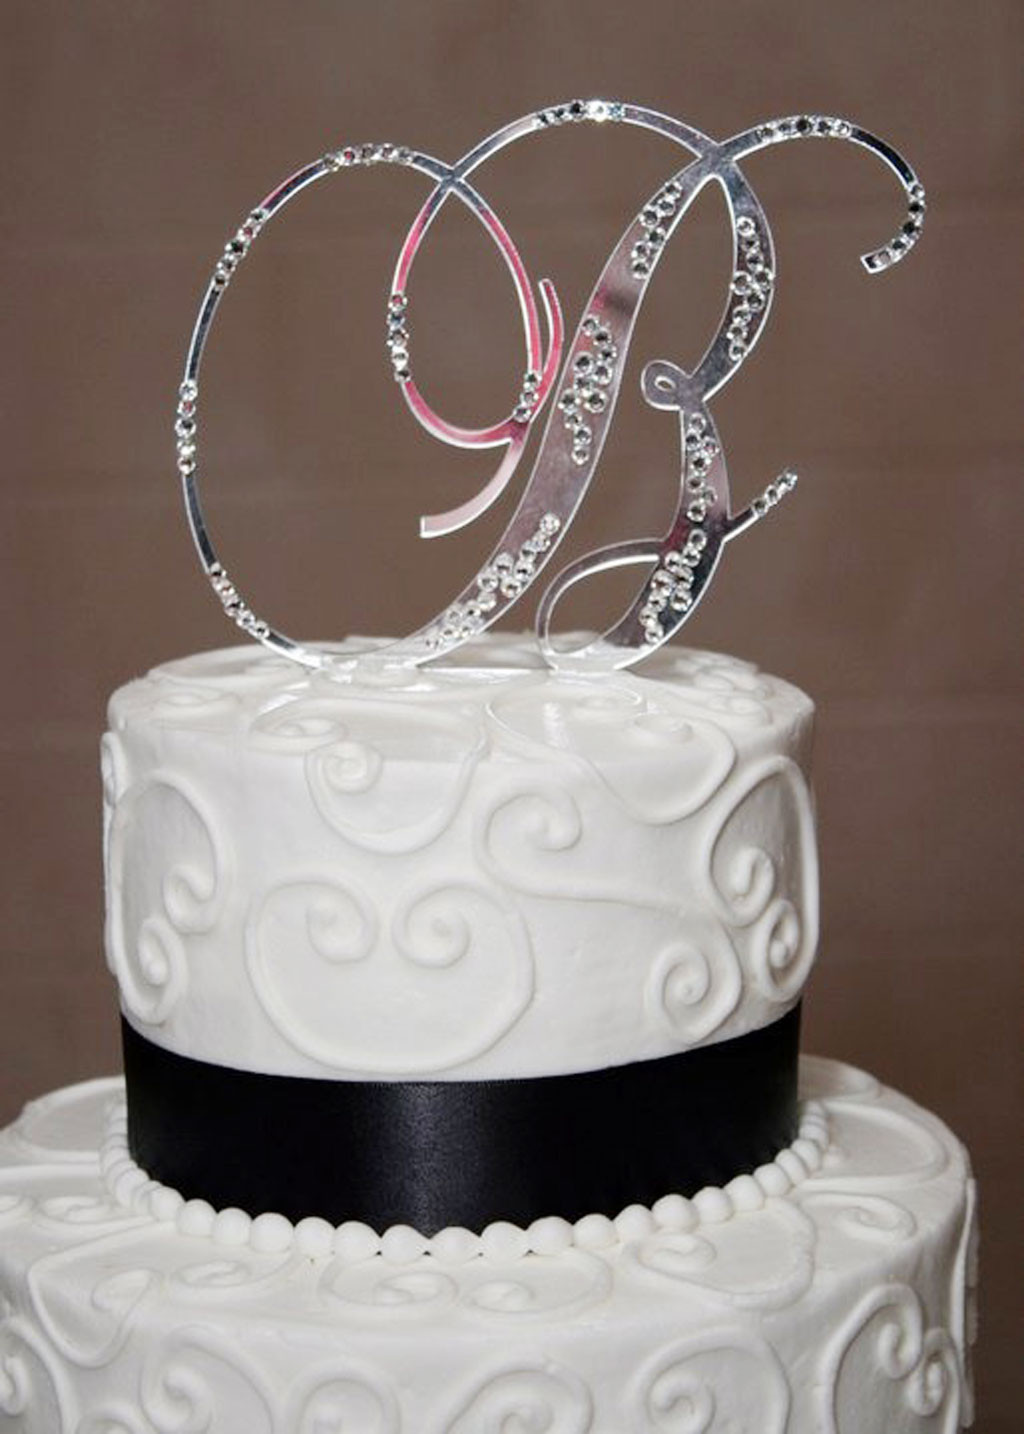 Wedding Cakes Toppers
 Initial B Wedding Bling Cake Topper Wedding Cake Cake